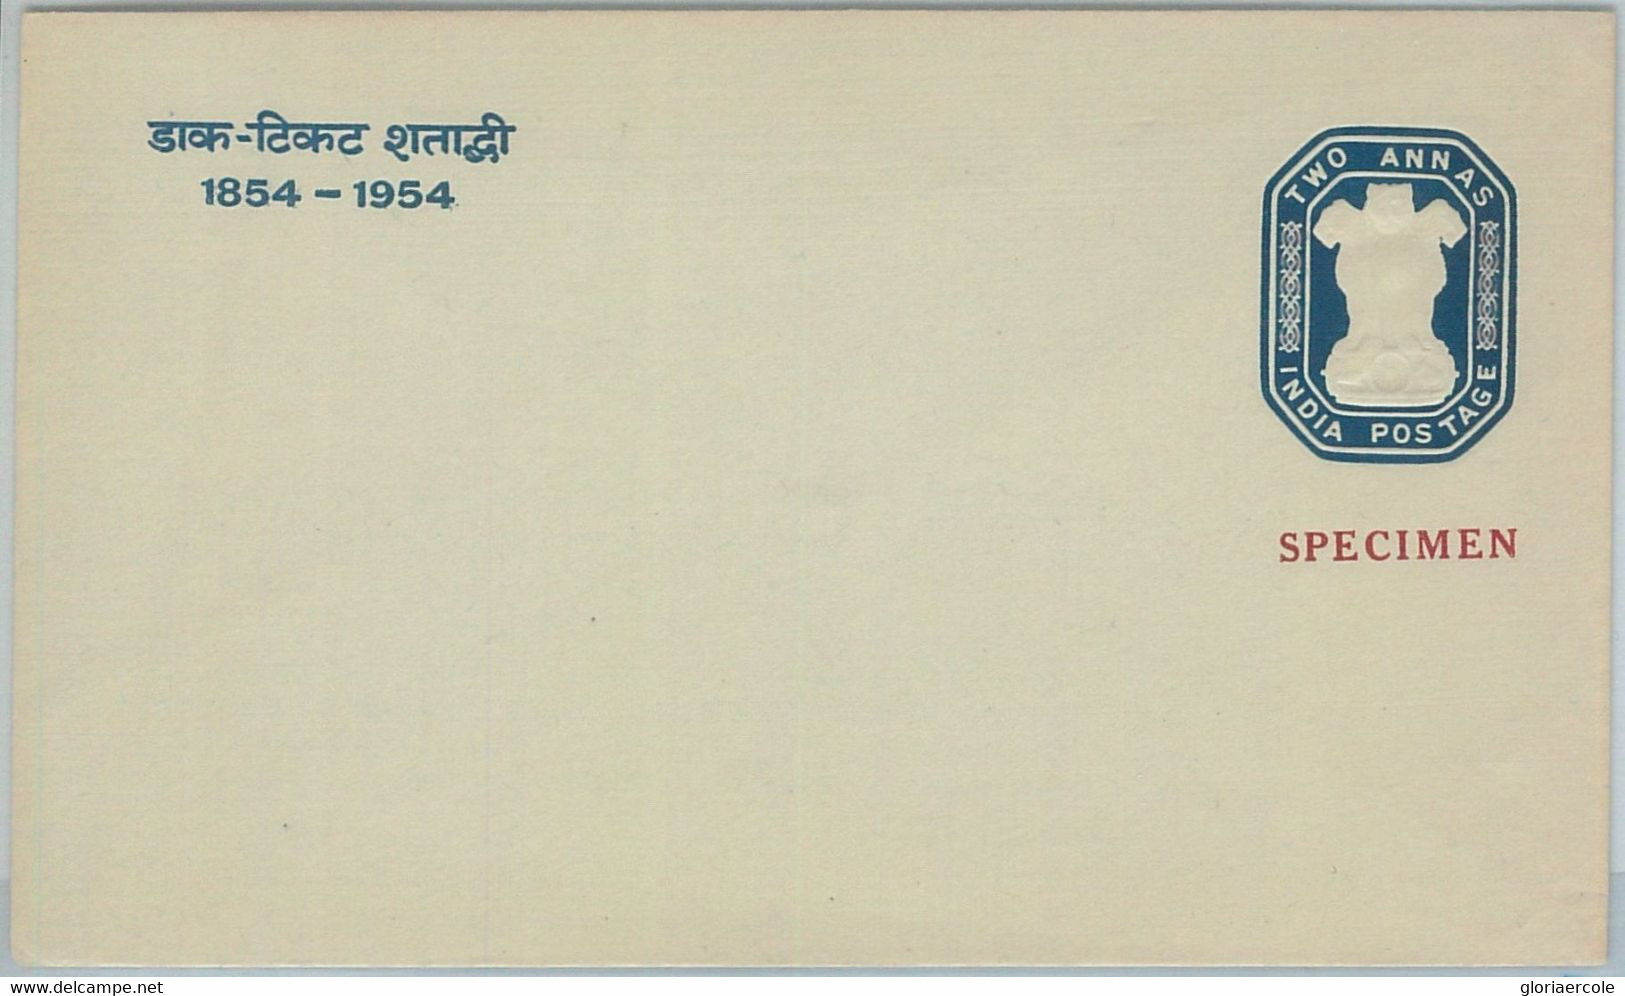 74840 - INDIA -  POSTAL HISTORY -  STATIONERY COVER Overprinted SPECIMEN - 1954 - Covers